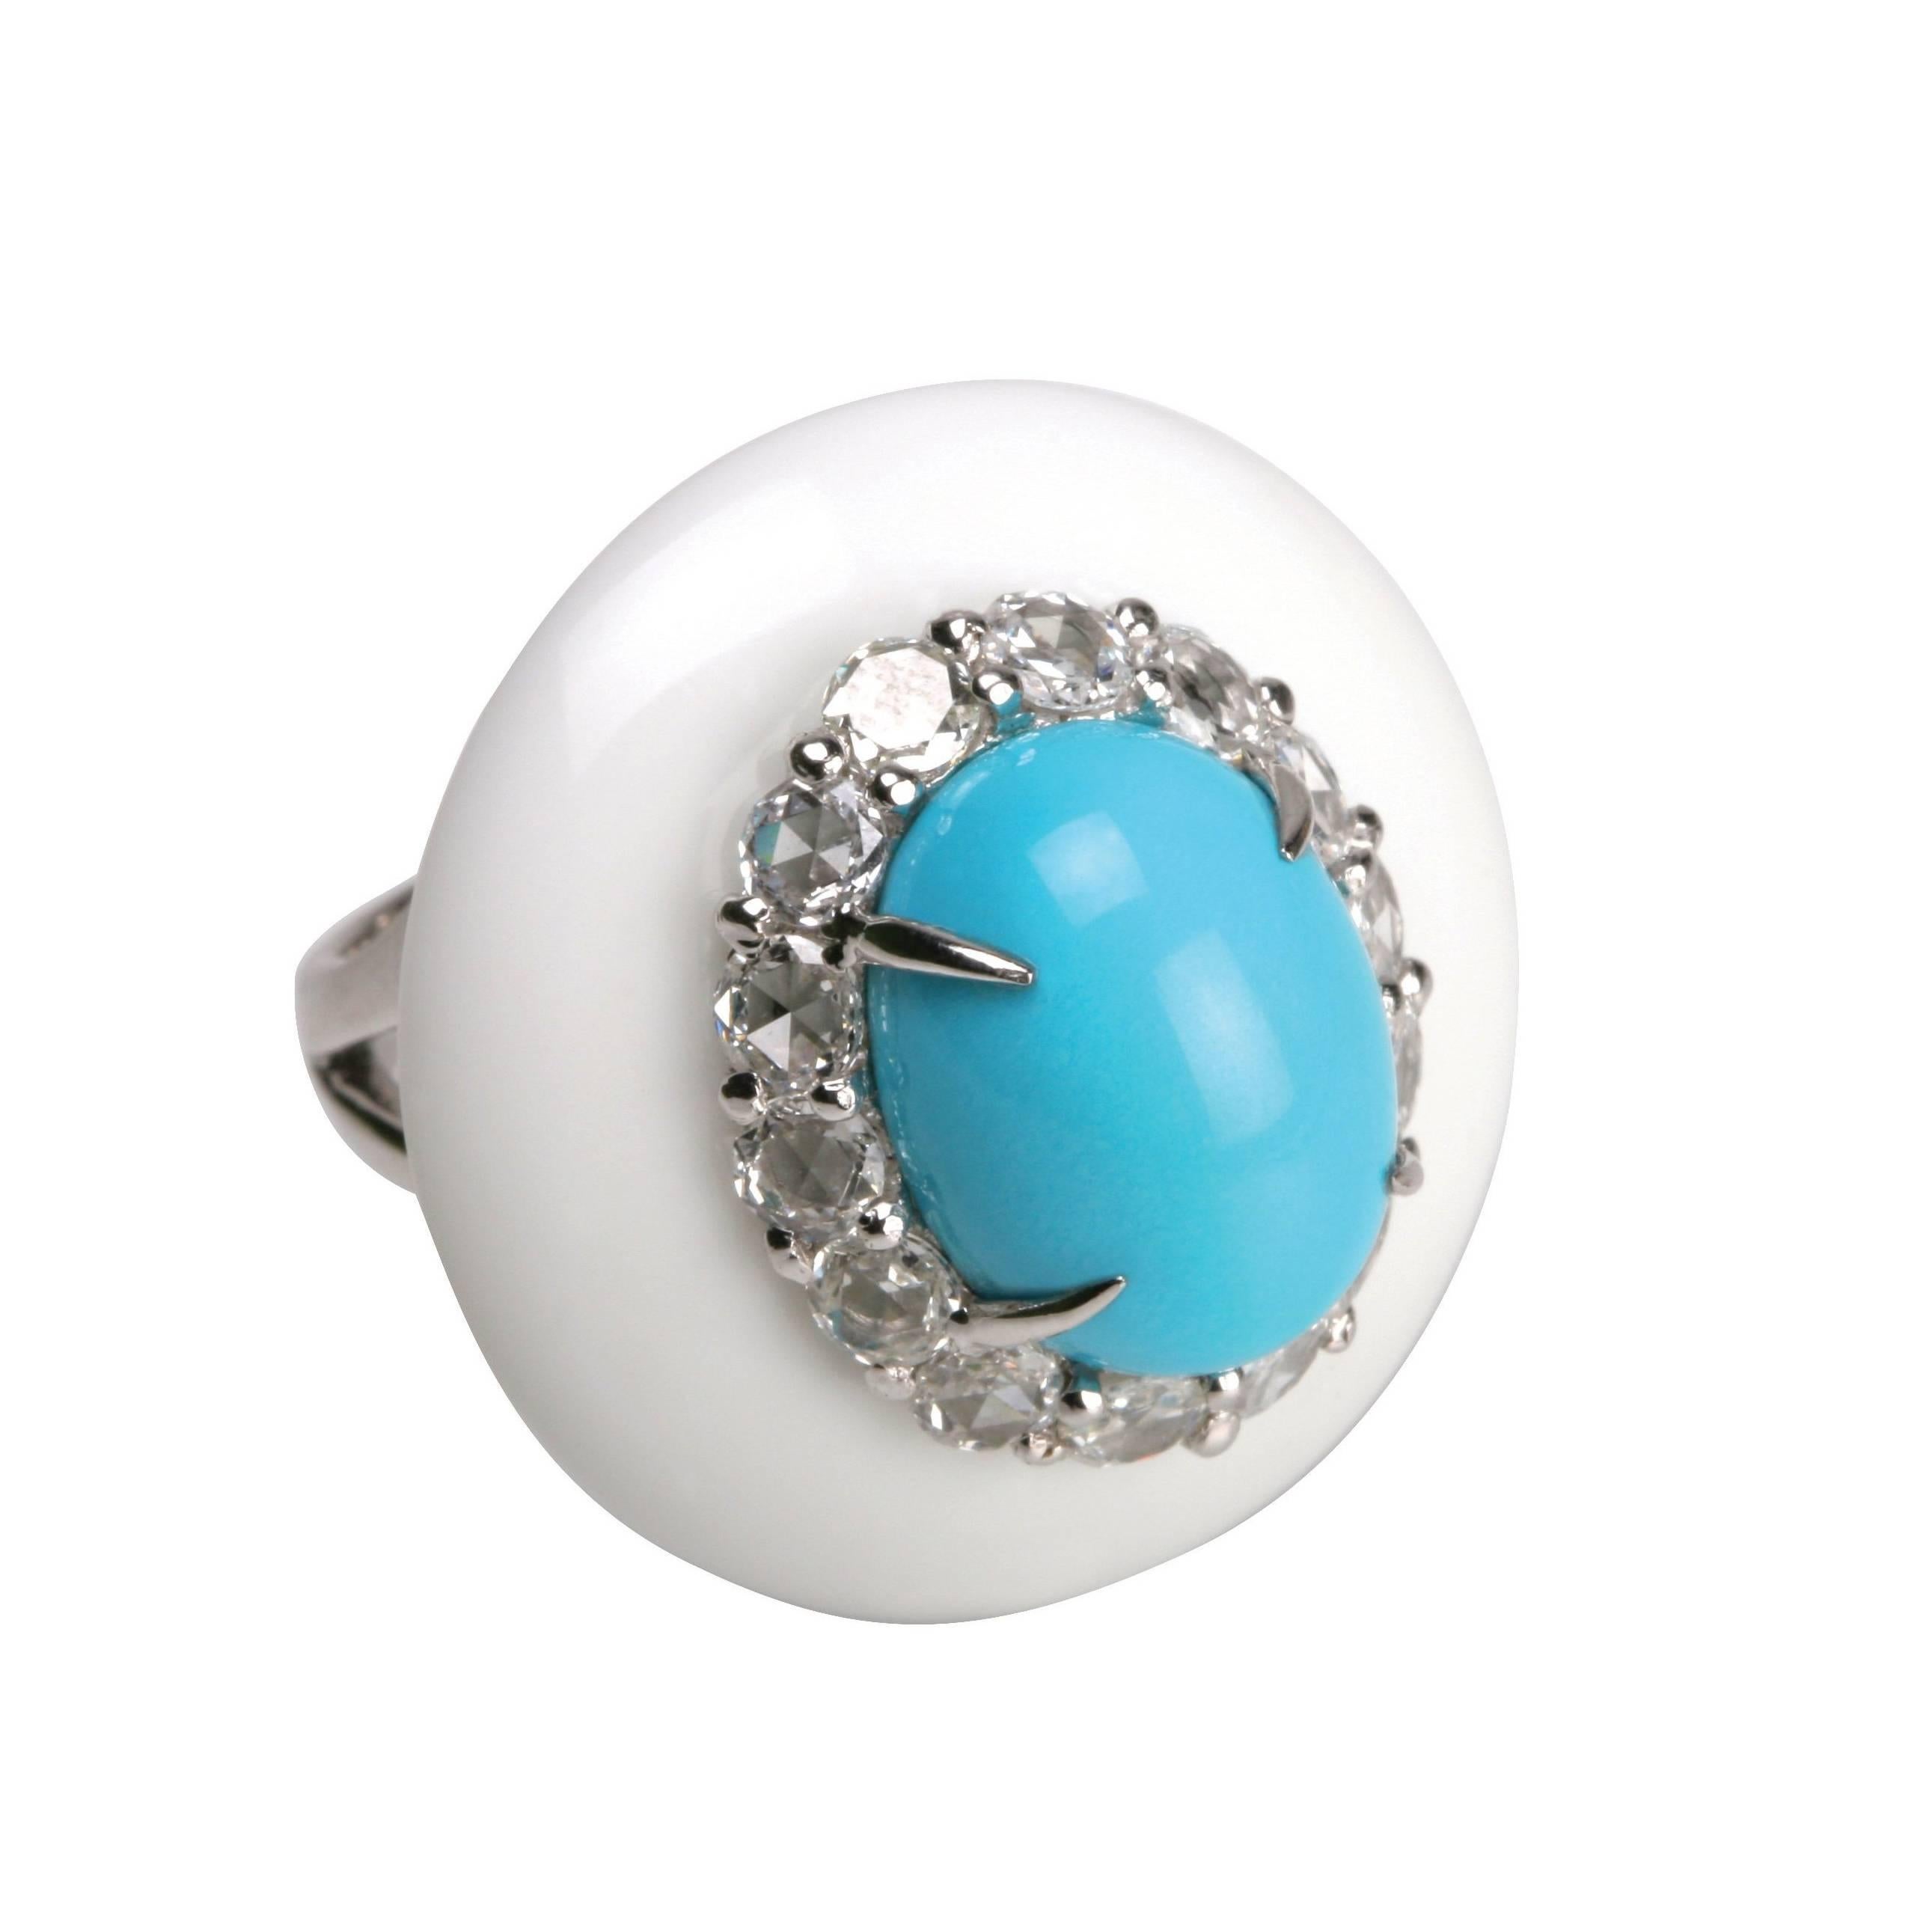 Youmna Fine Jewellery 18K White Gold w/ Agate, Turquoise & Diamond Cocktail Ring For Sale